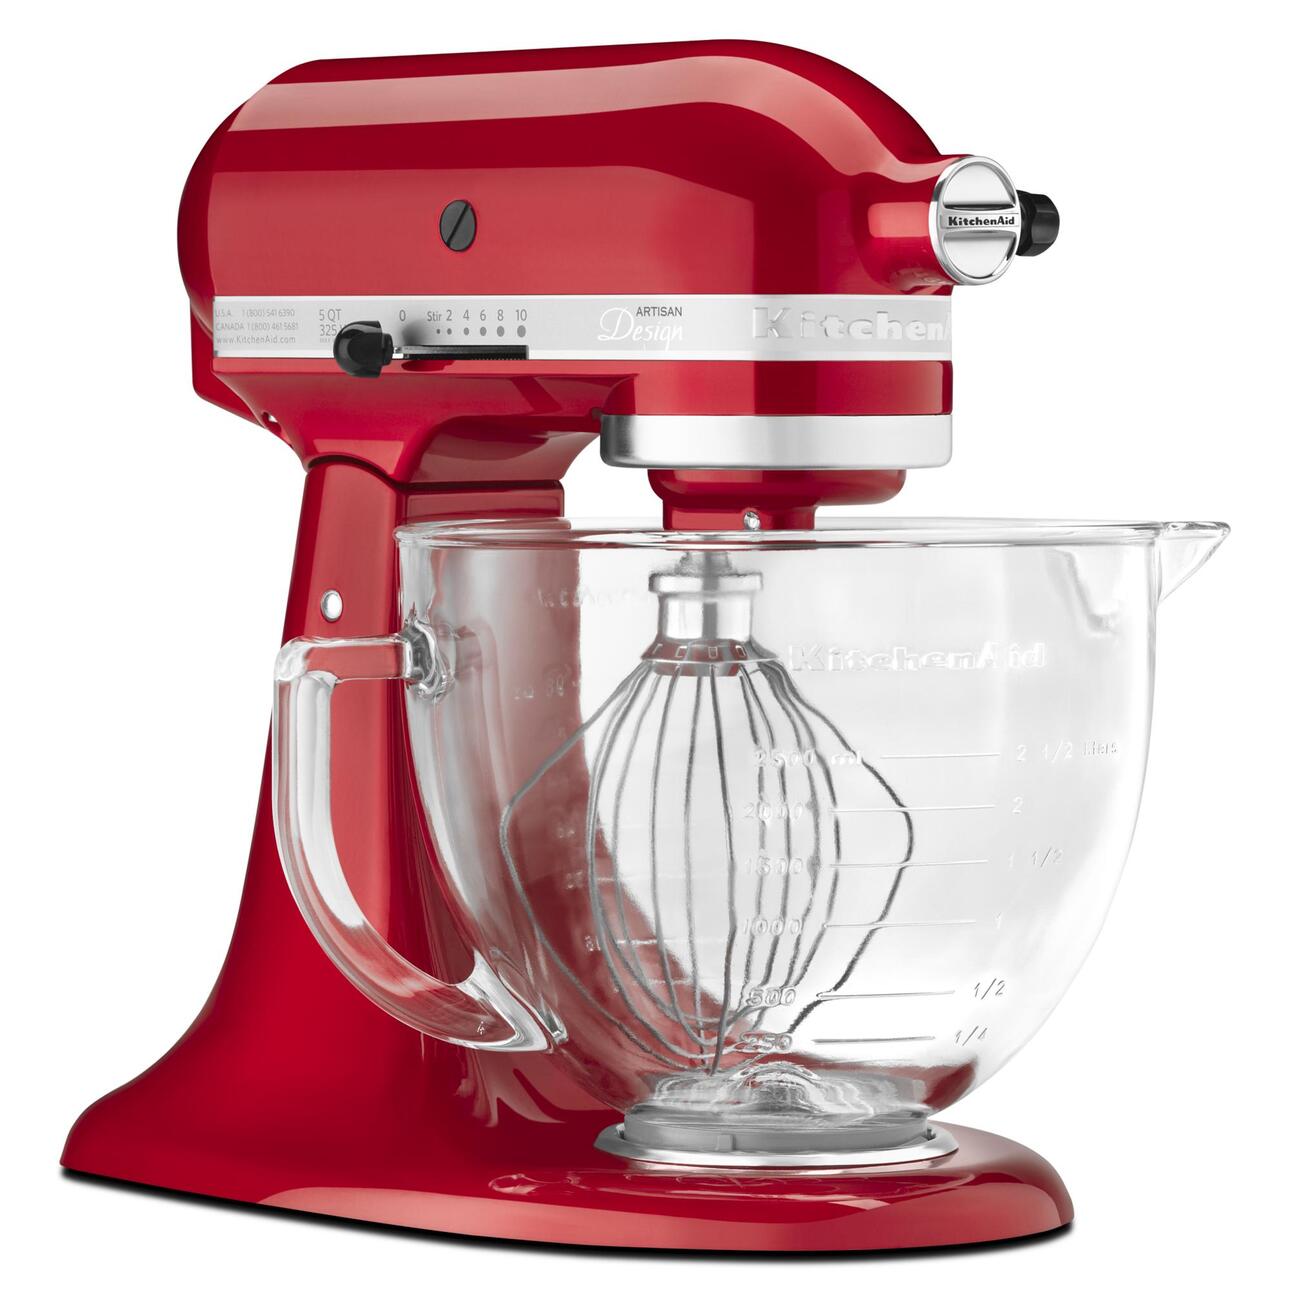 KitchenAid Artisan Design Series 5 Quart Tilt-Head Stand Mixer with Glass Bowl, Candy Apple Red, KSM155GB - image 3 of 7